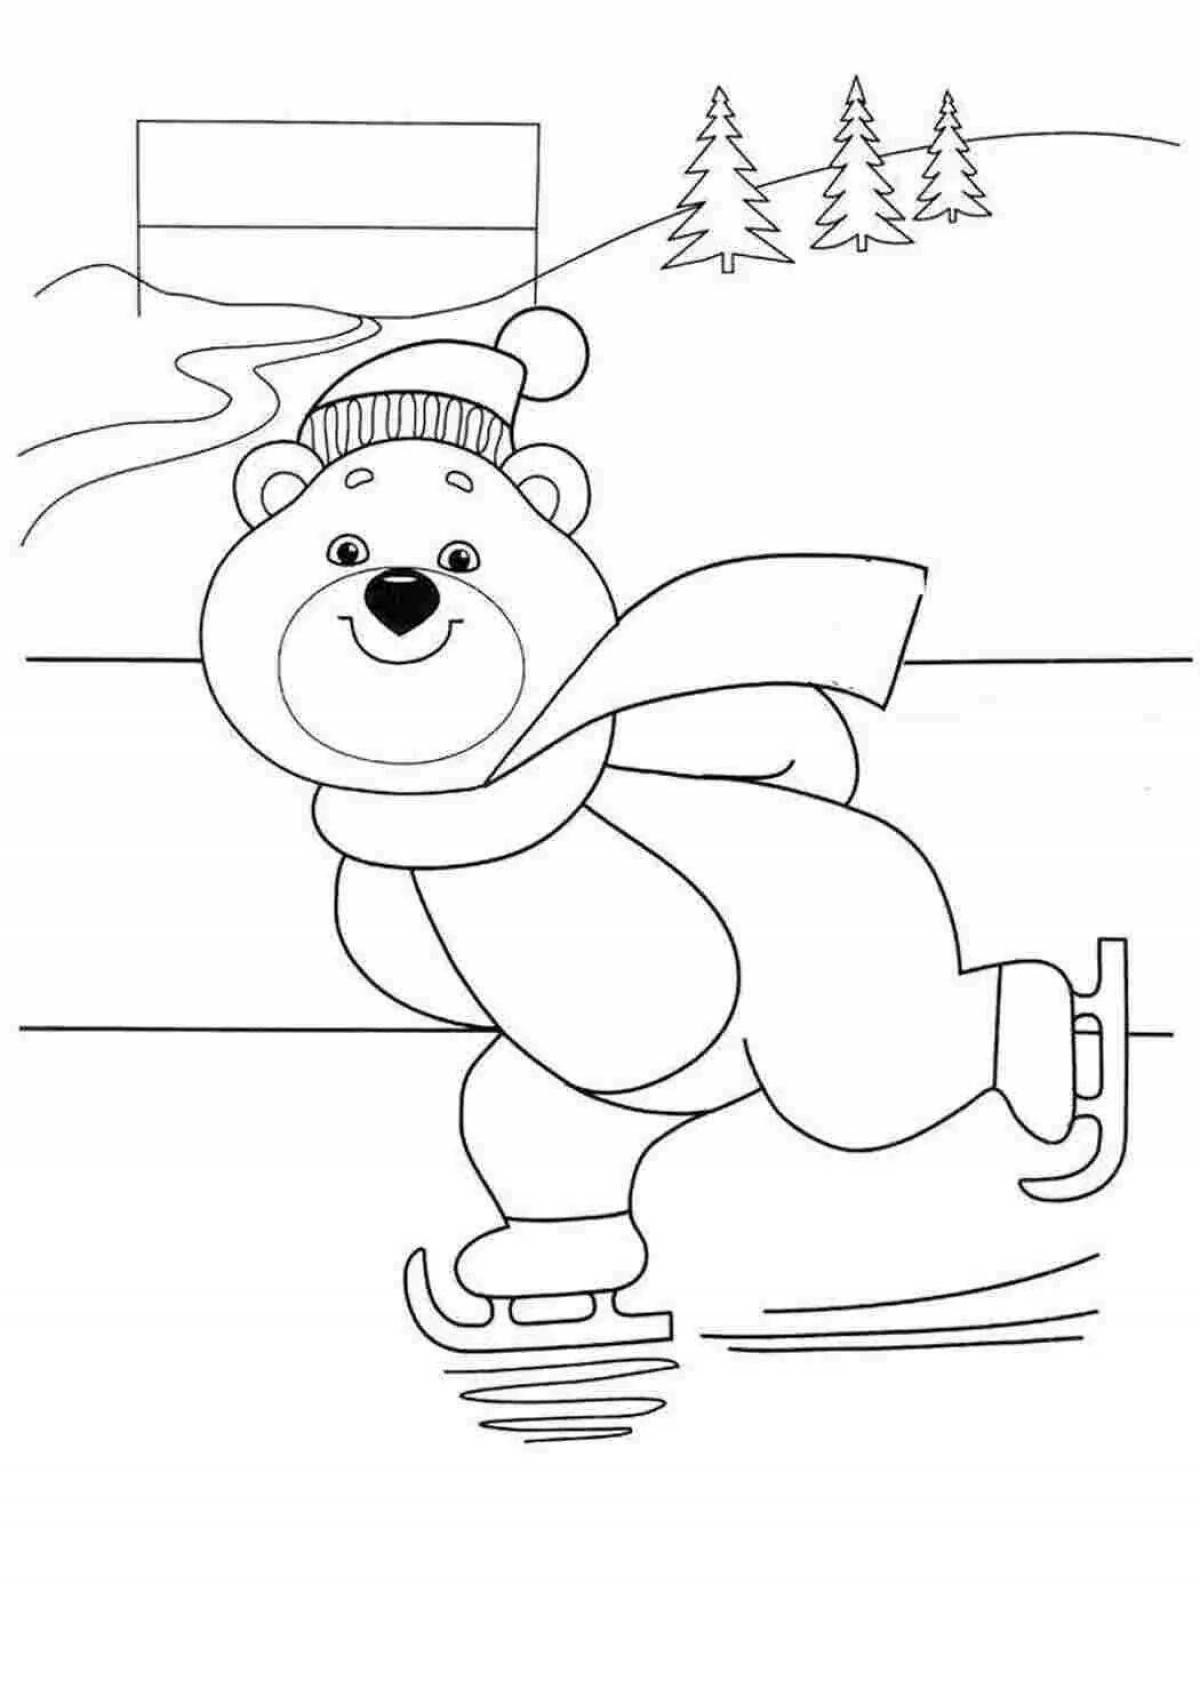 Fabulous winter olympic games for kids